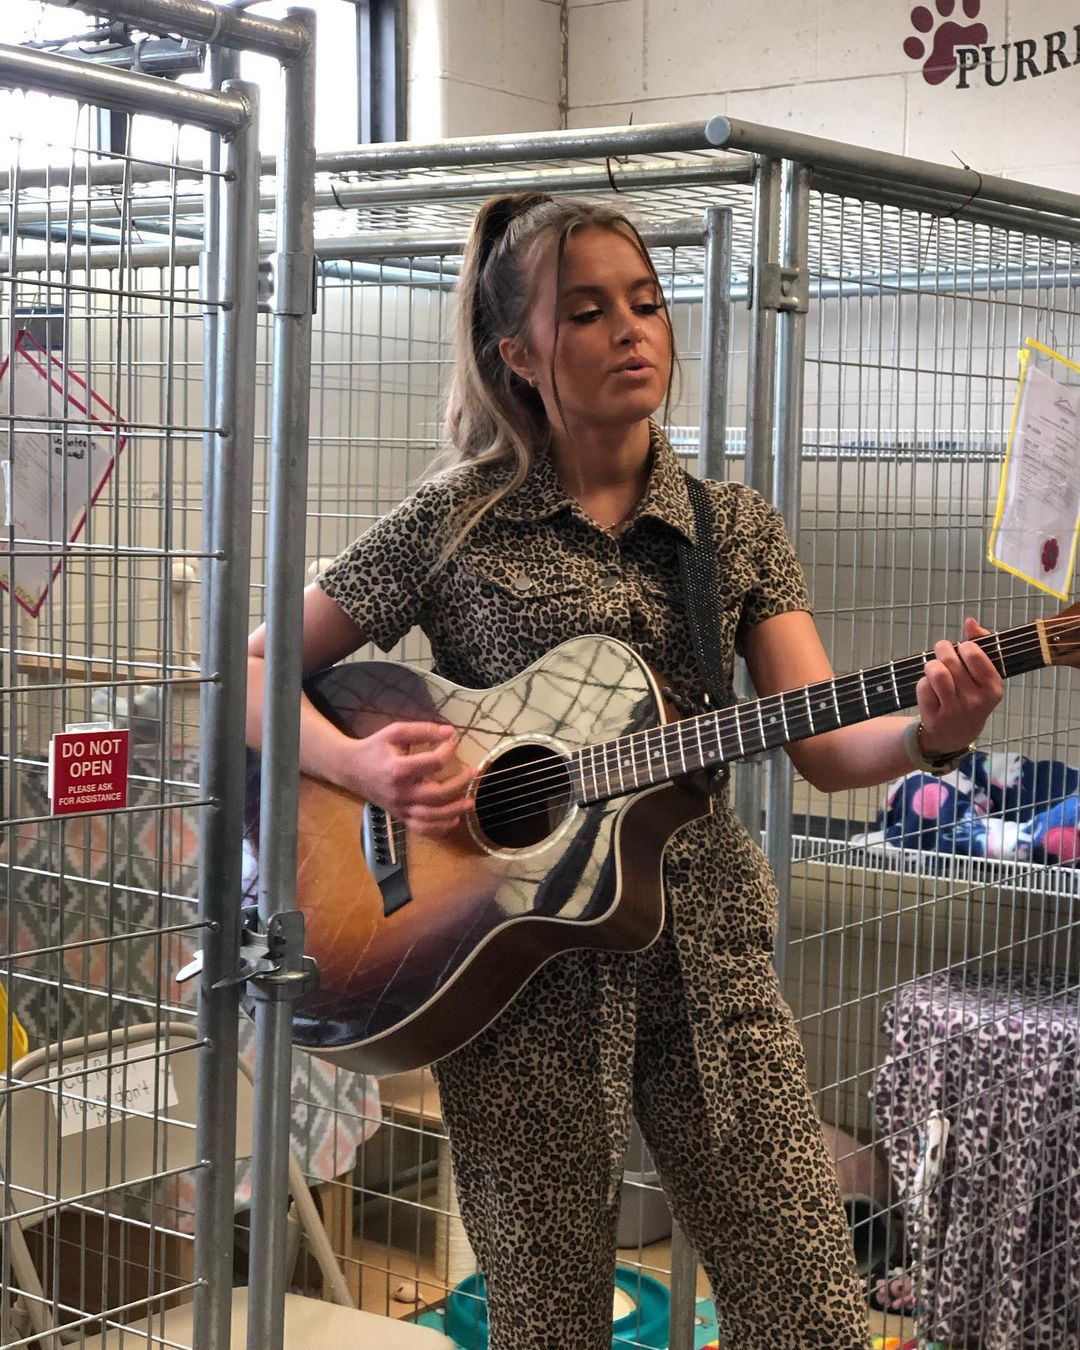 We were visited by our friend @dariannleigh yesterday for an in shelter concert for our sweet pets and needless to say, she has some new furry fans!😹
HUGE thank you to Dariann for taking the time to bring a little music to the Circle of Friends! ❤️🐾